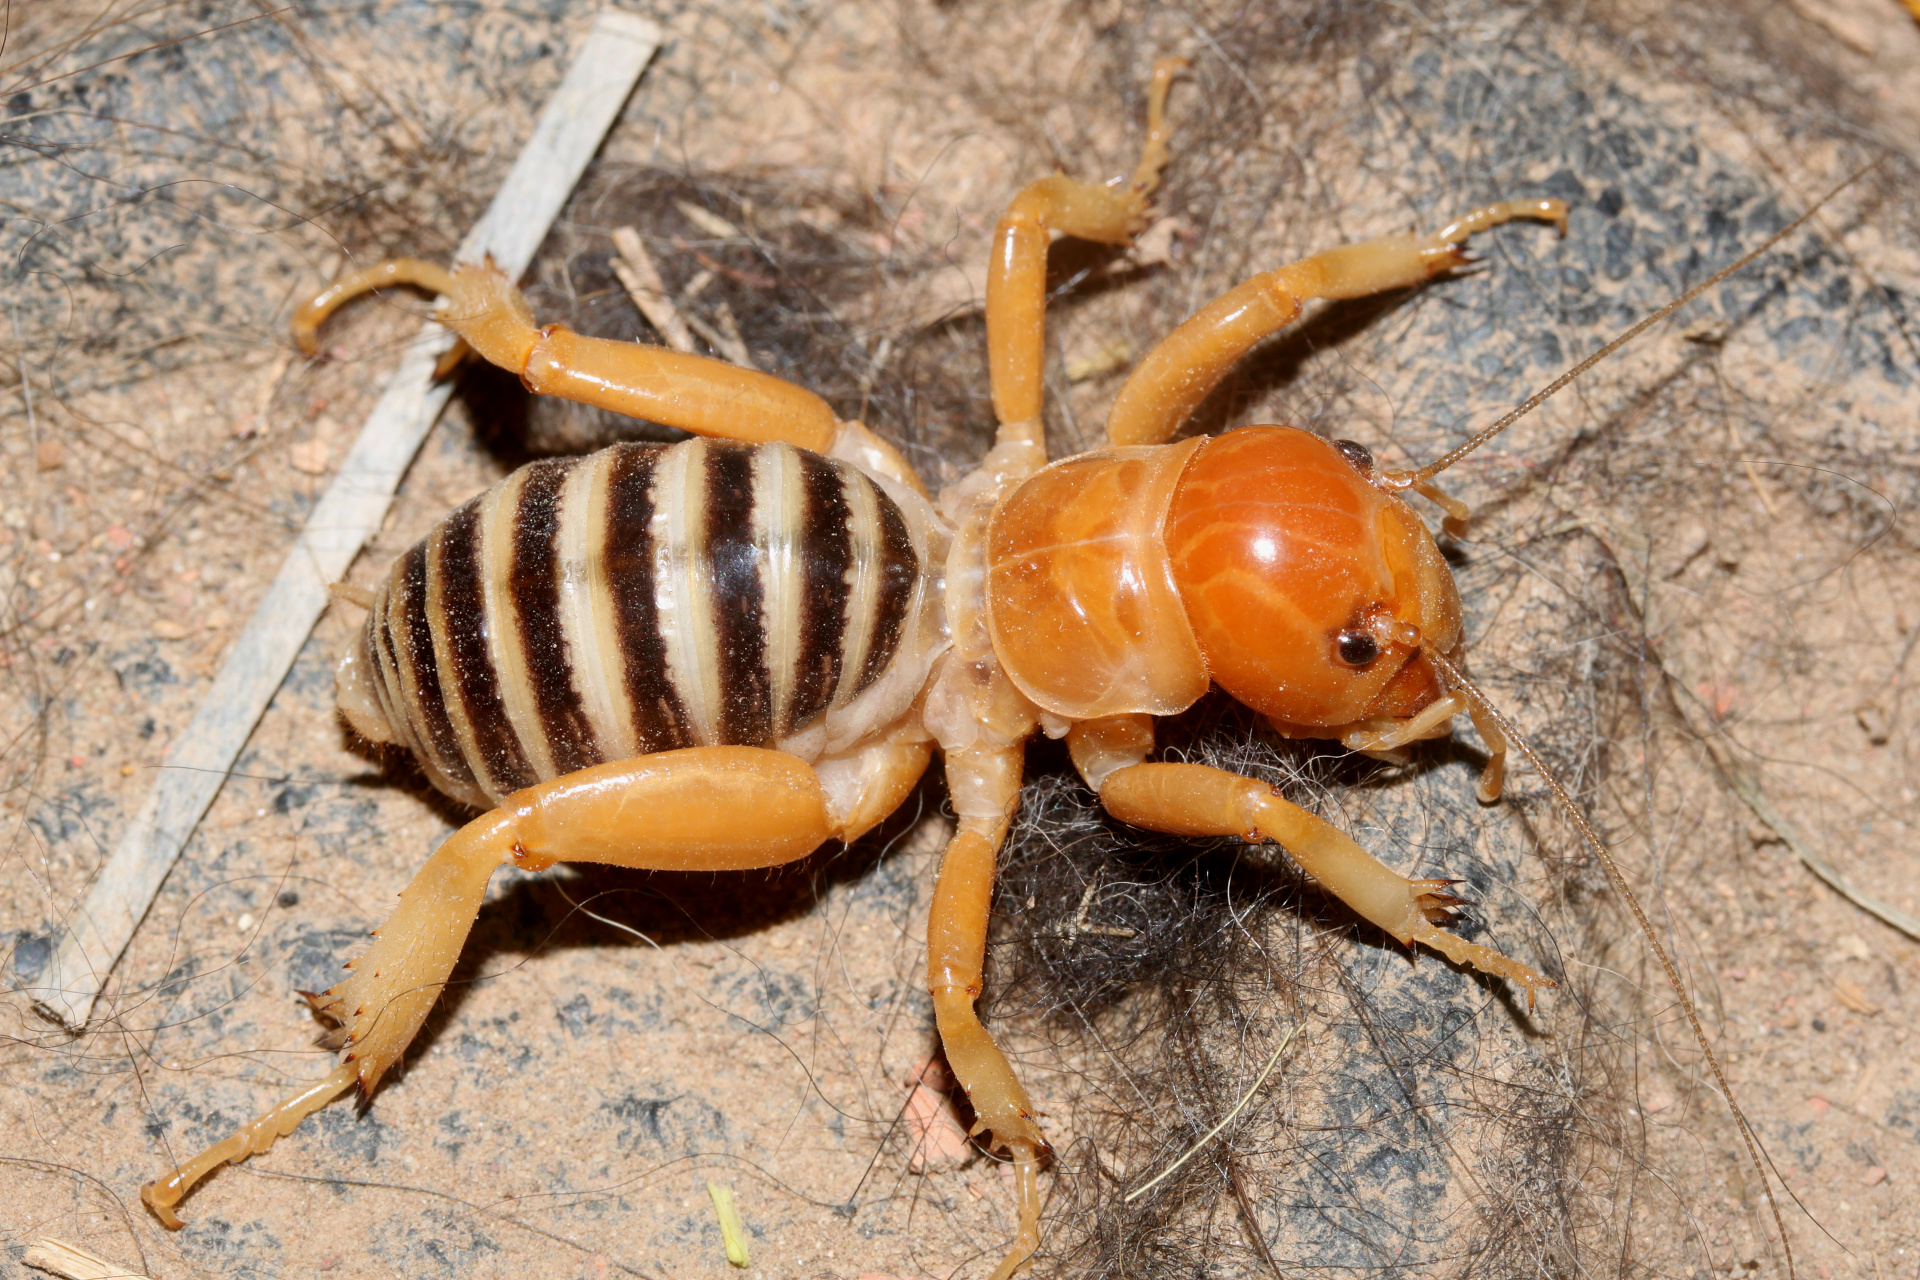 Jerusalem Cricket (Travels » US Trip 3: The Roads Not Taken » Animals » Insects » Grashoppers and crickets)